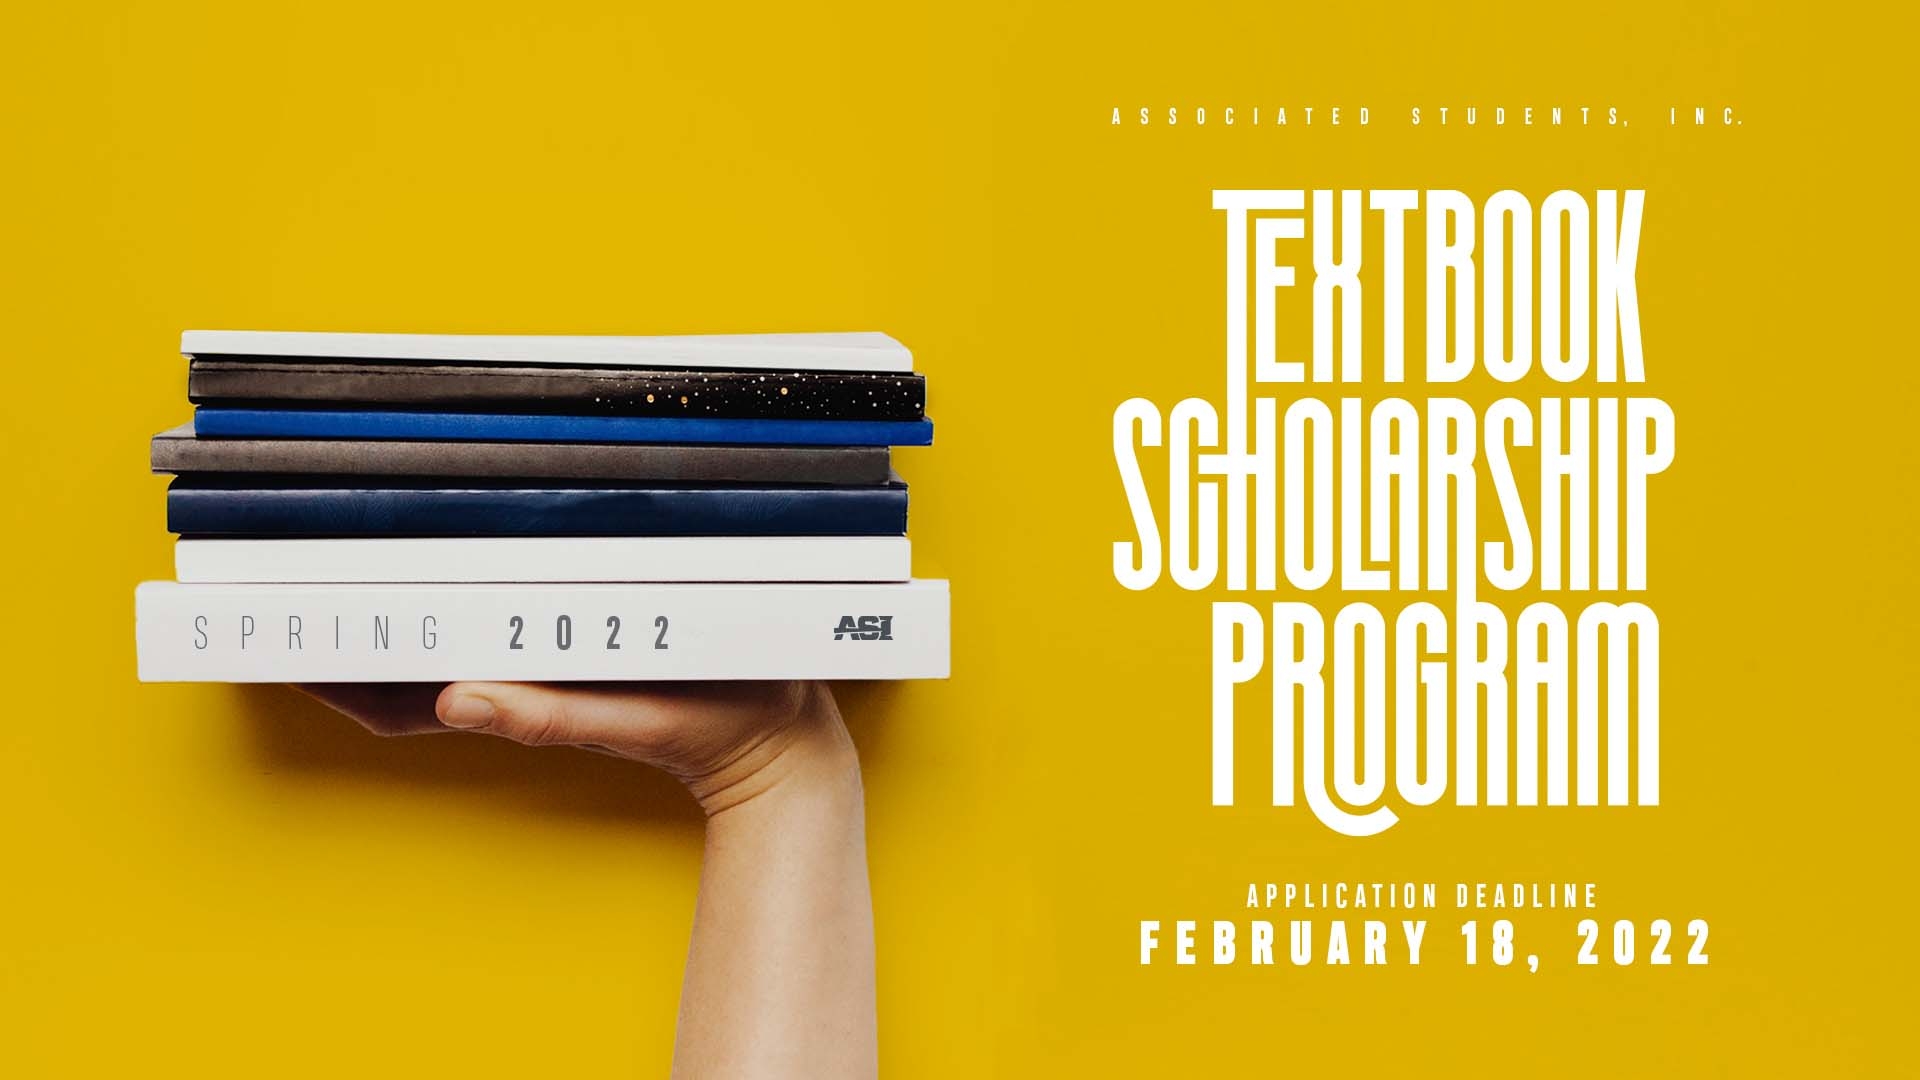 A hand holding up a stack of books. ASI Scholarship Program, Application Deadline February 18, 2022.